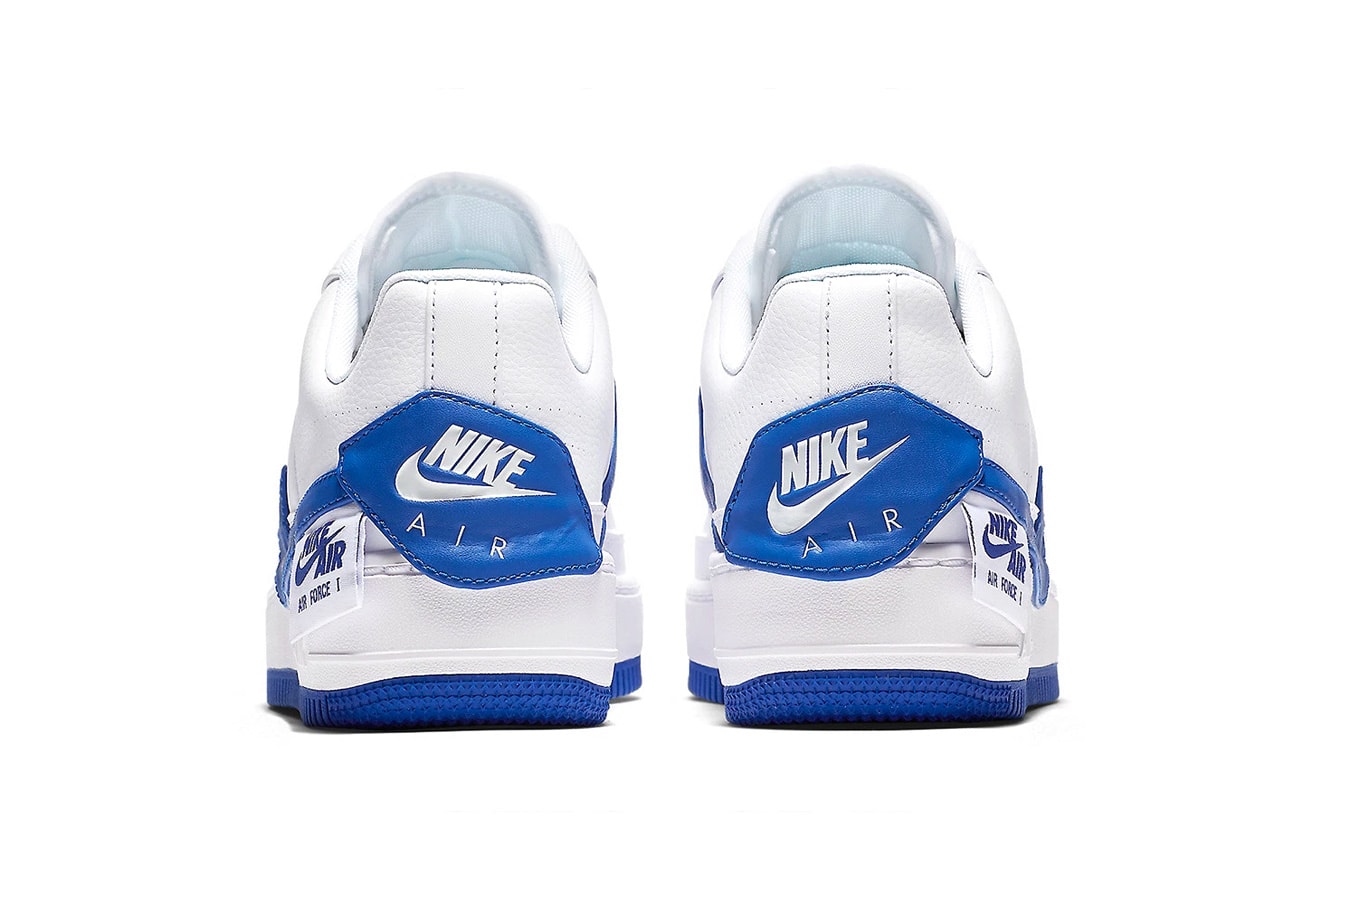 Nike Air Force 1 low Jester royal white sneaker deconstructed the 1s reimagined leather blue footwear sneakers release